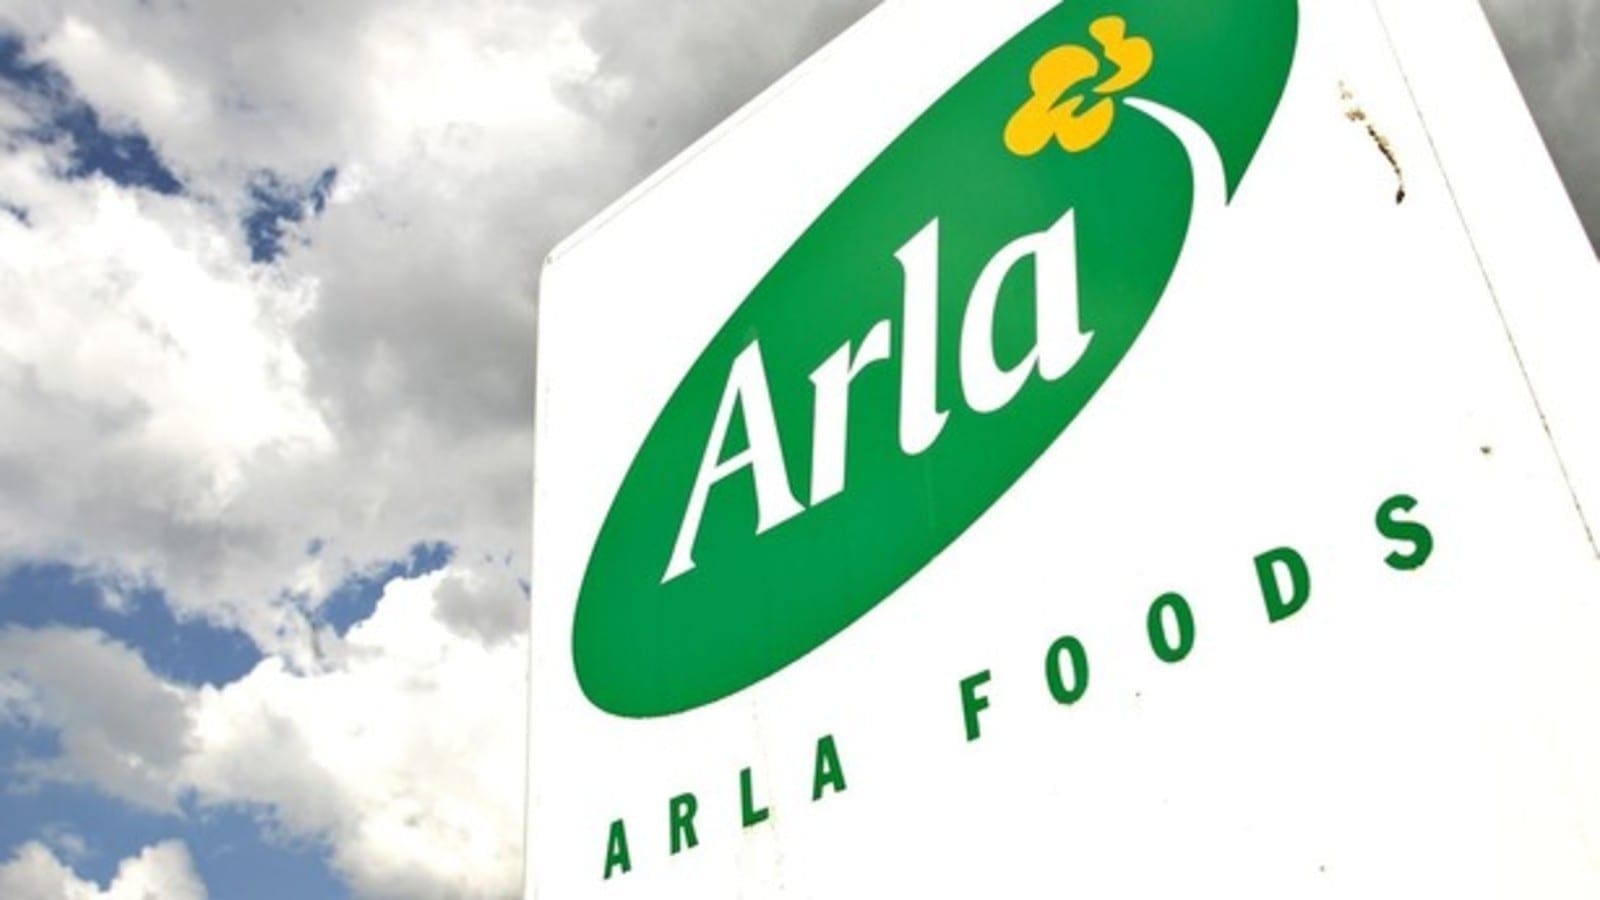 Arla Foods adds sustainability incentive to bolster Climate Check initiative in farms